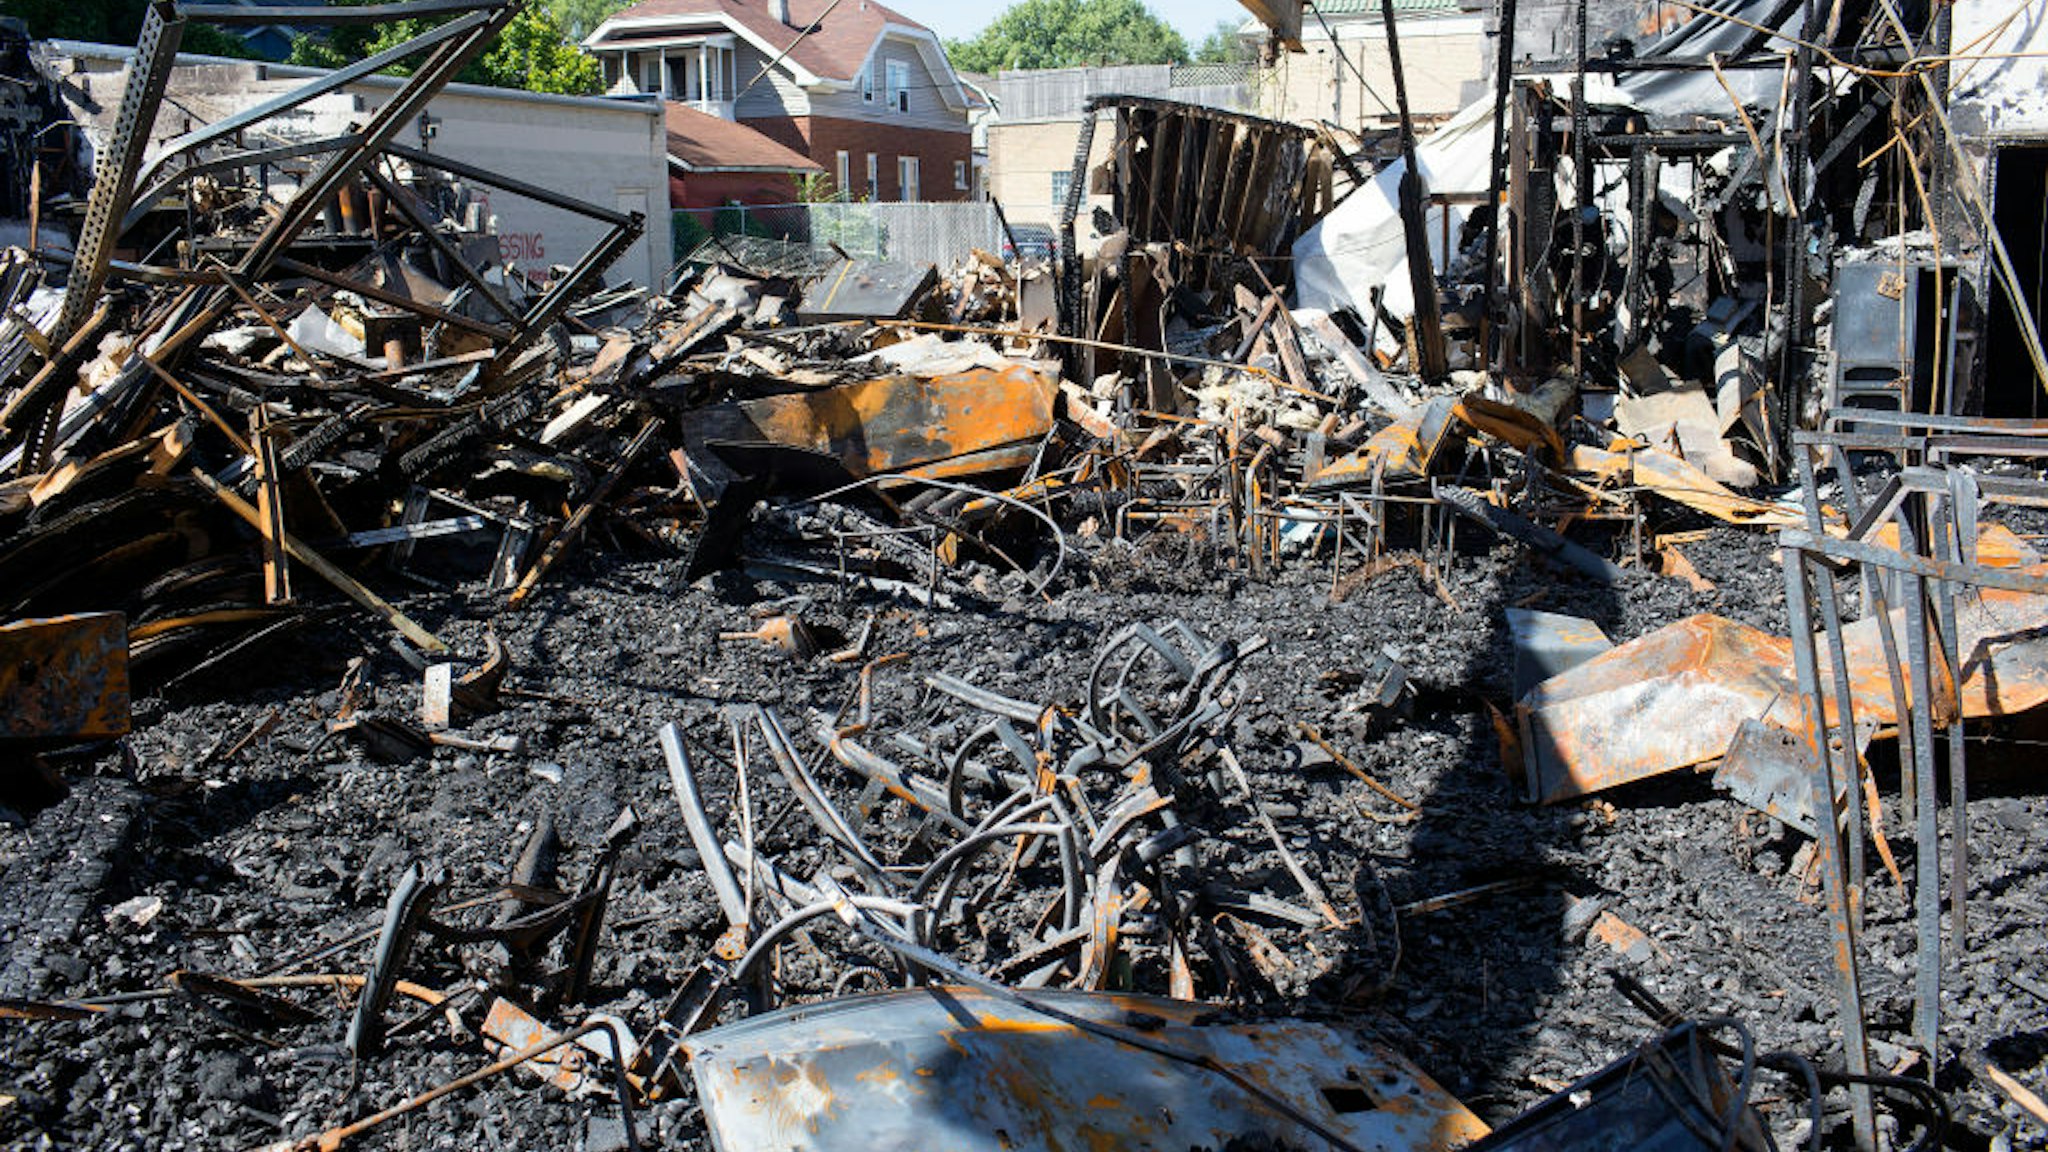 A week after rioting in response to the police shooting of Jacob Blake, the rubble of burned stores remain in the Uptown neighborhood, September 2, 2020 on Kenosha, Wisconsin.